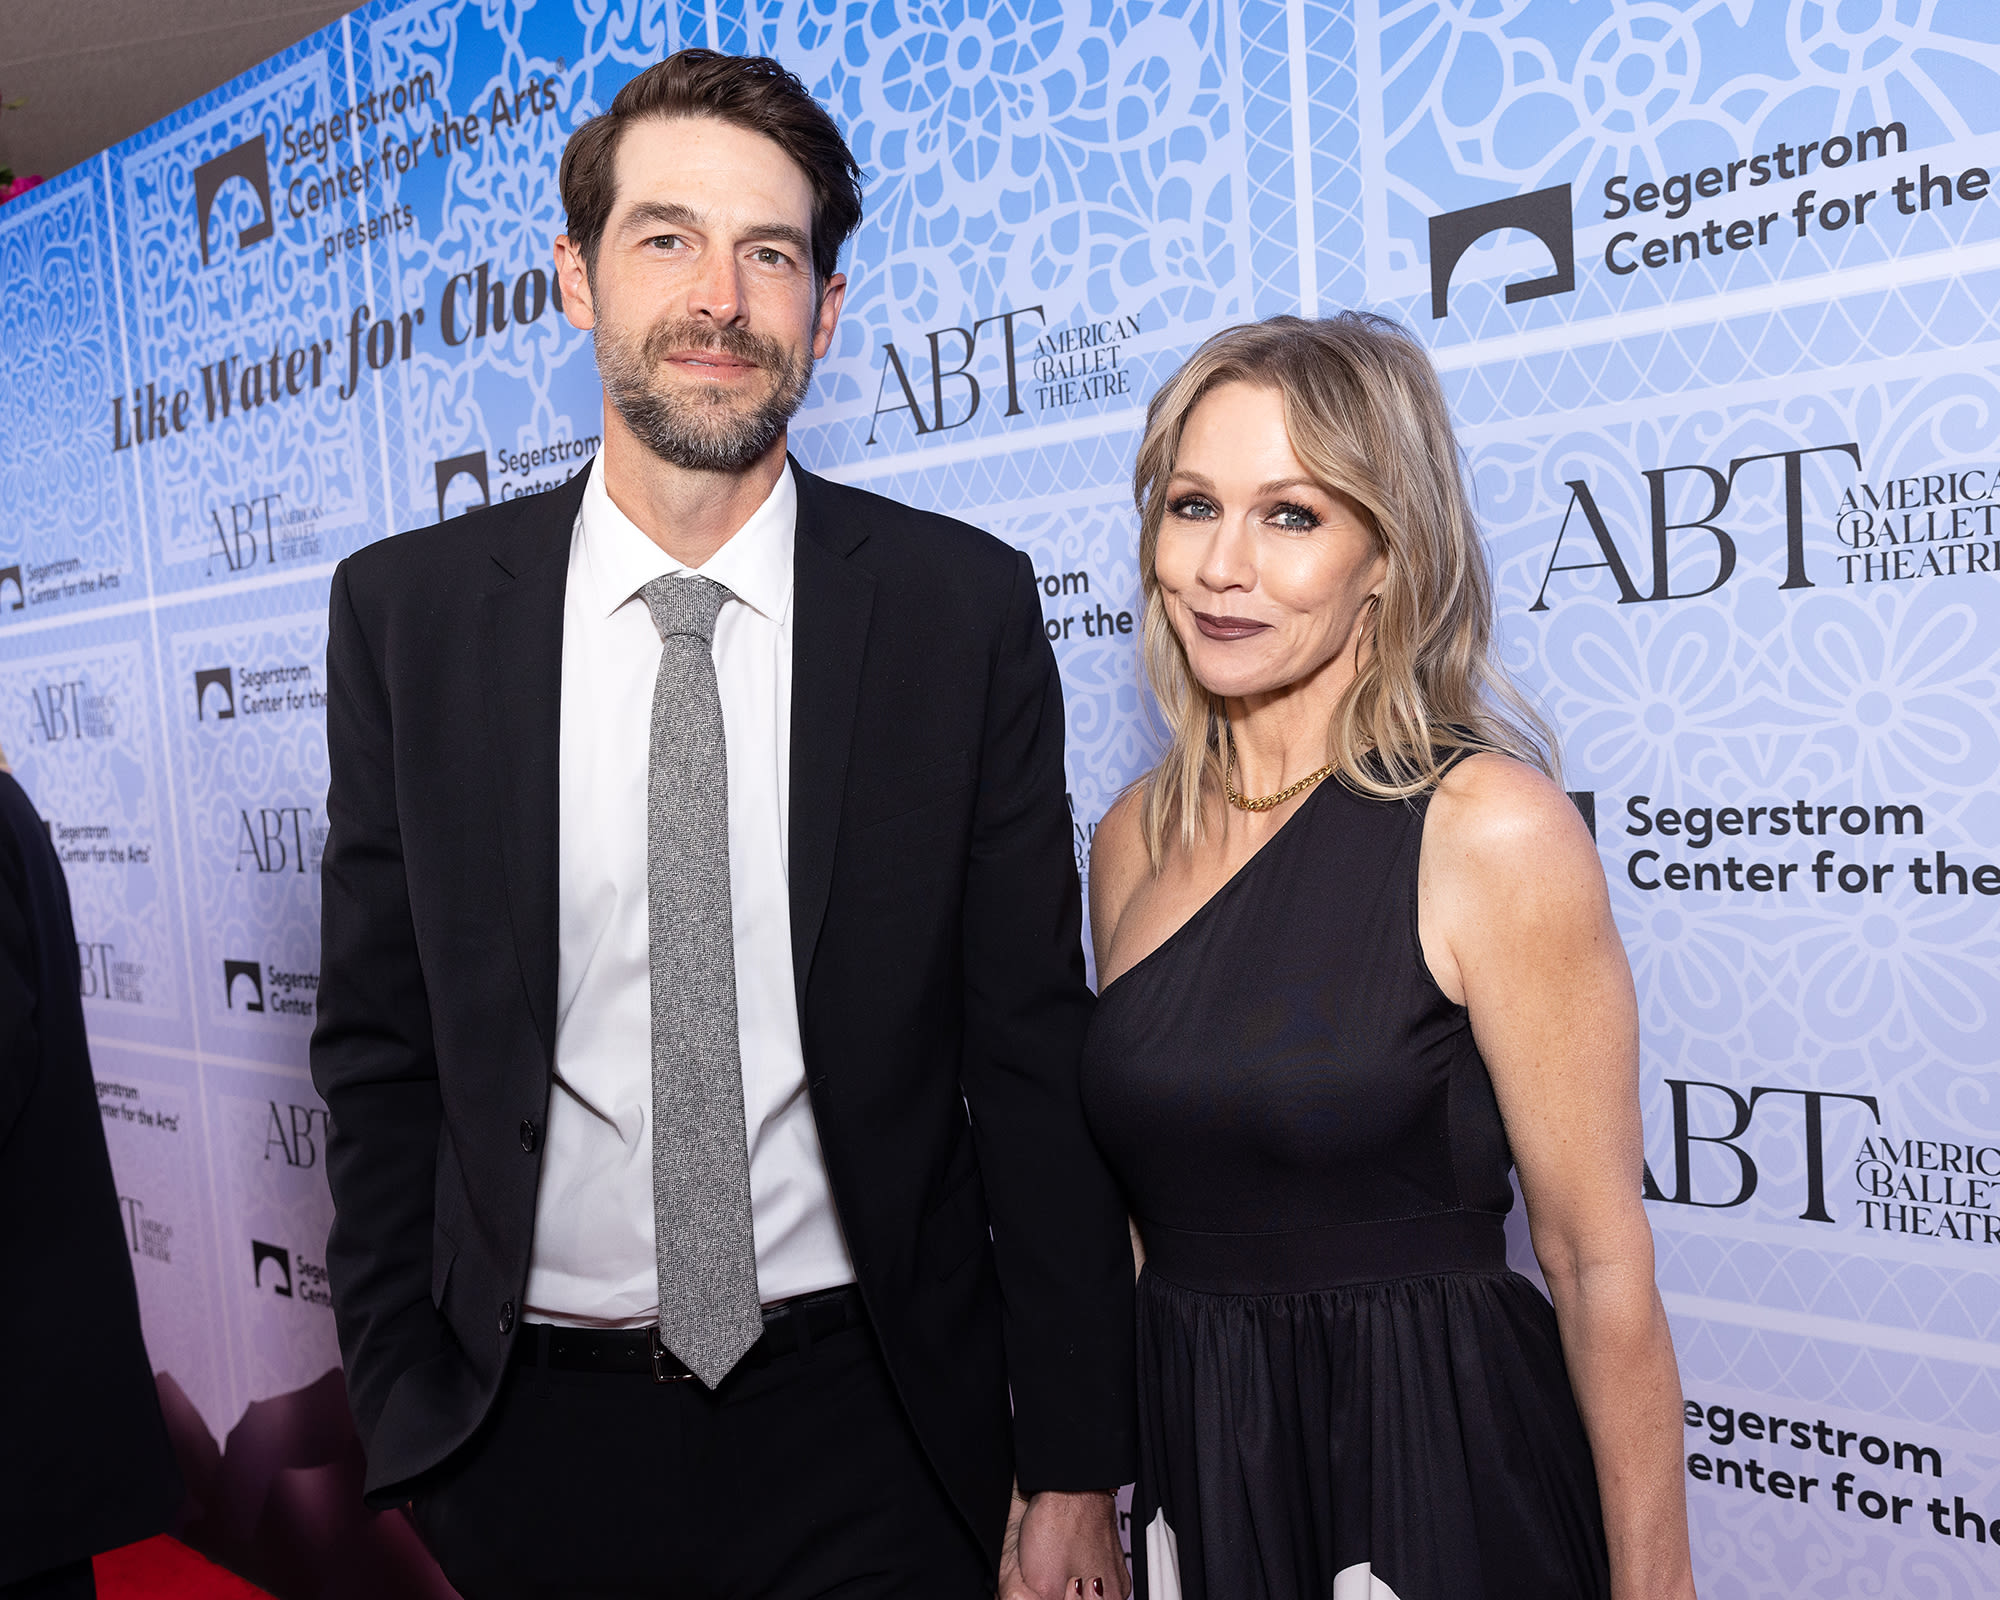 Jennie Garth’s Husband Dave Abrams Says He ‘Slept in the Guest Room’ When Her Kids Were Home